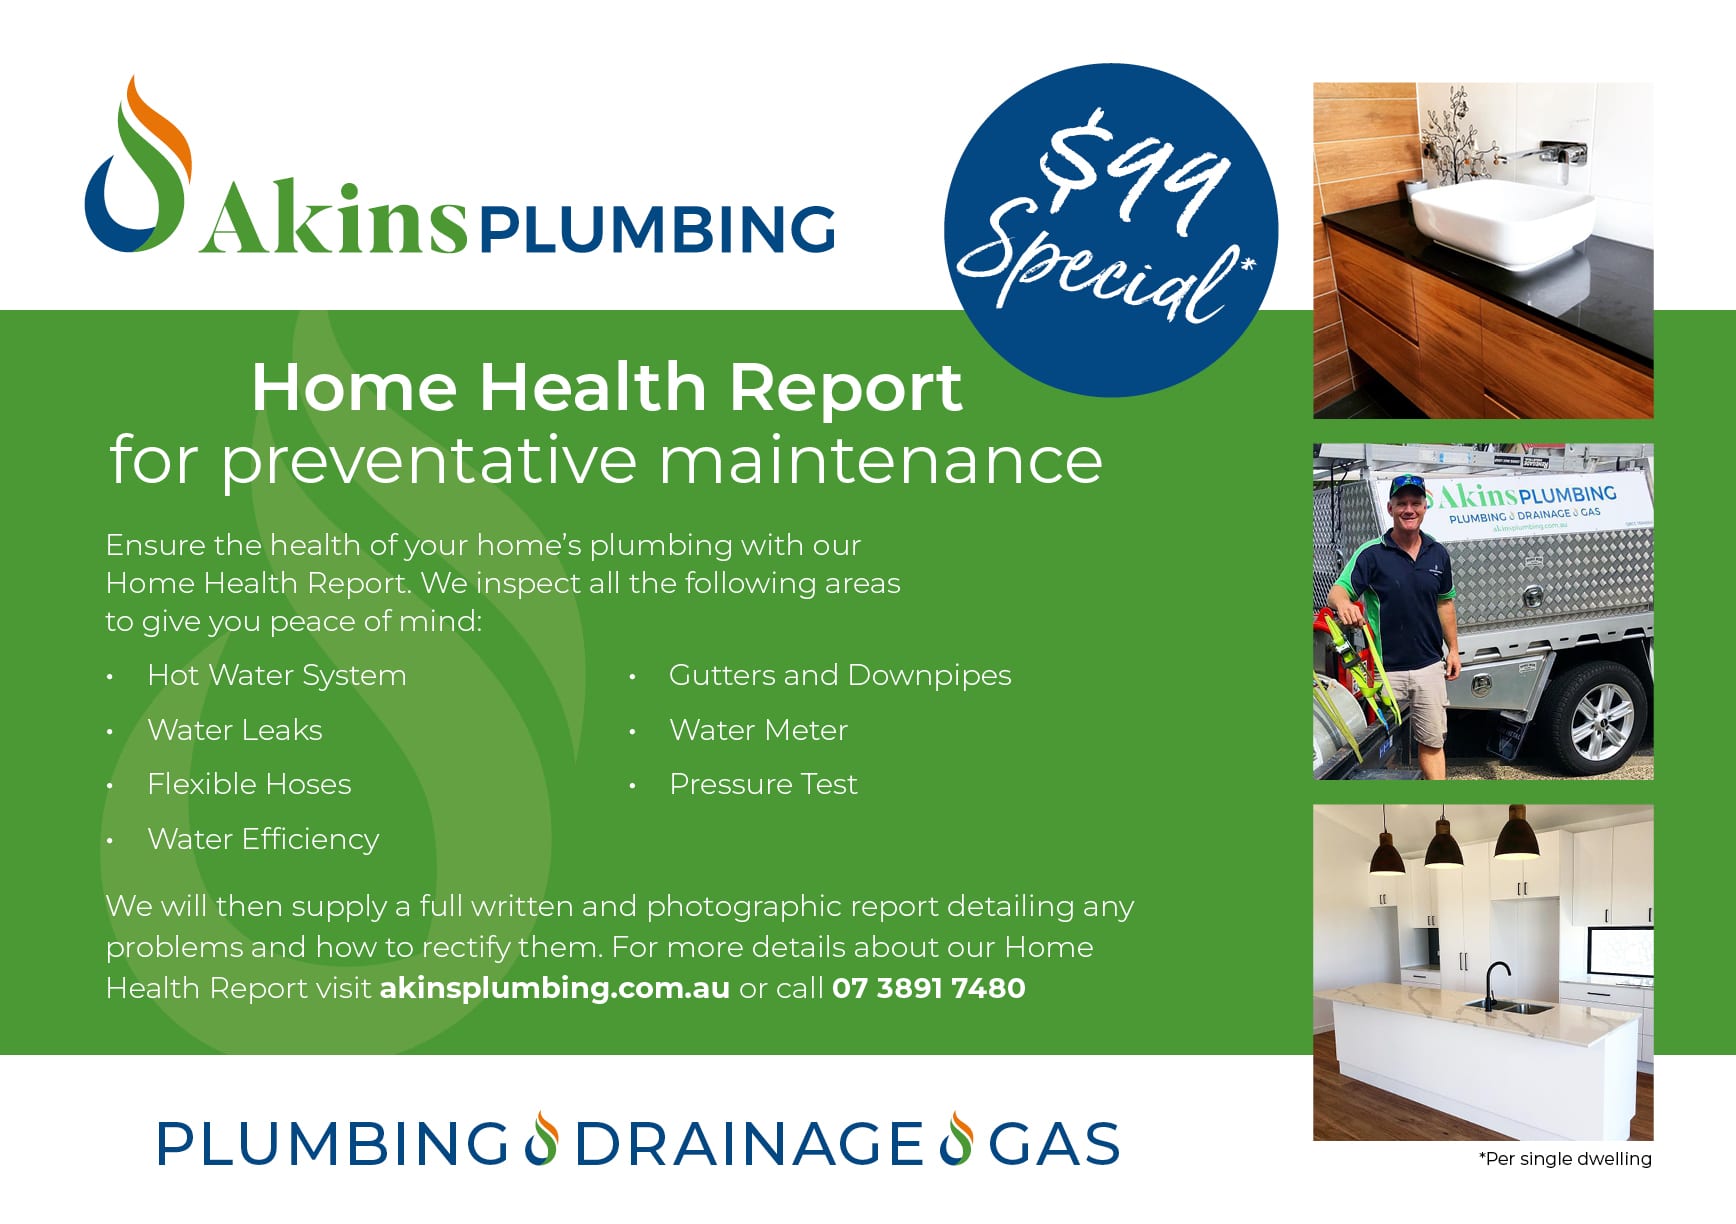 Image of Akins Plumbing $99 Special for Home Health Report for preventative maintenance | Featured image on Sustainable Plumbing Brisbane.